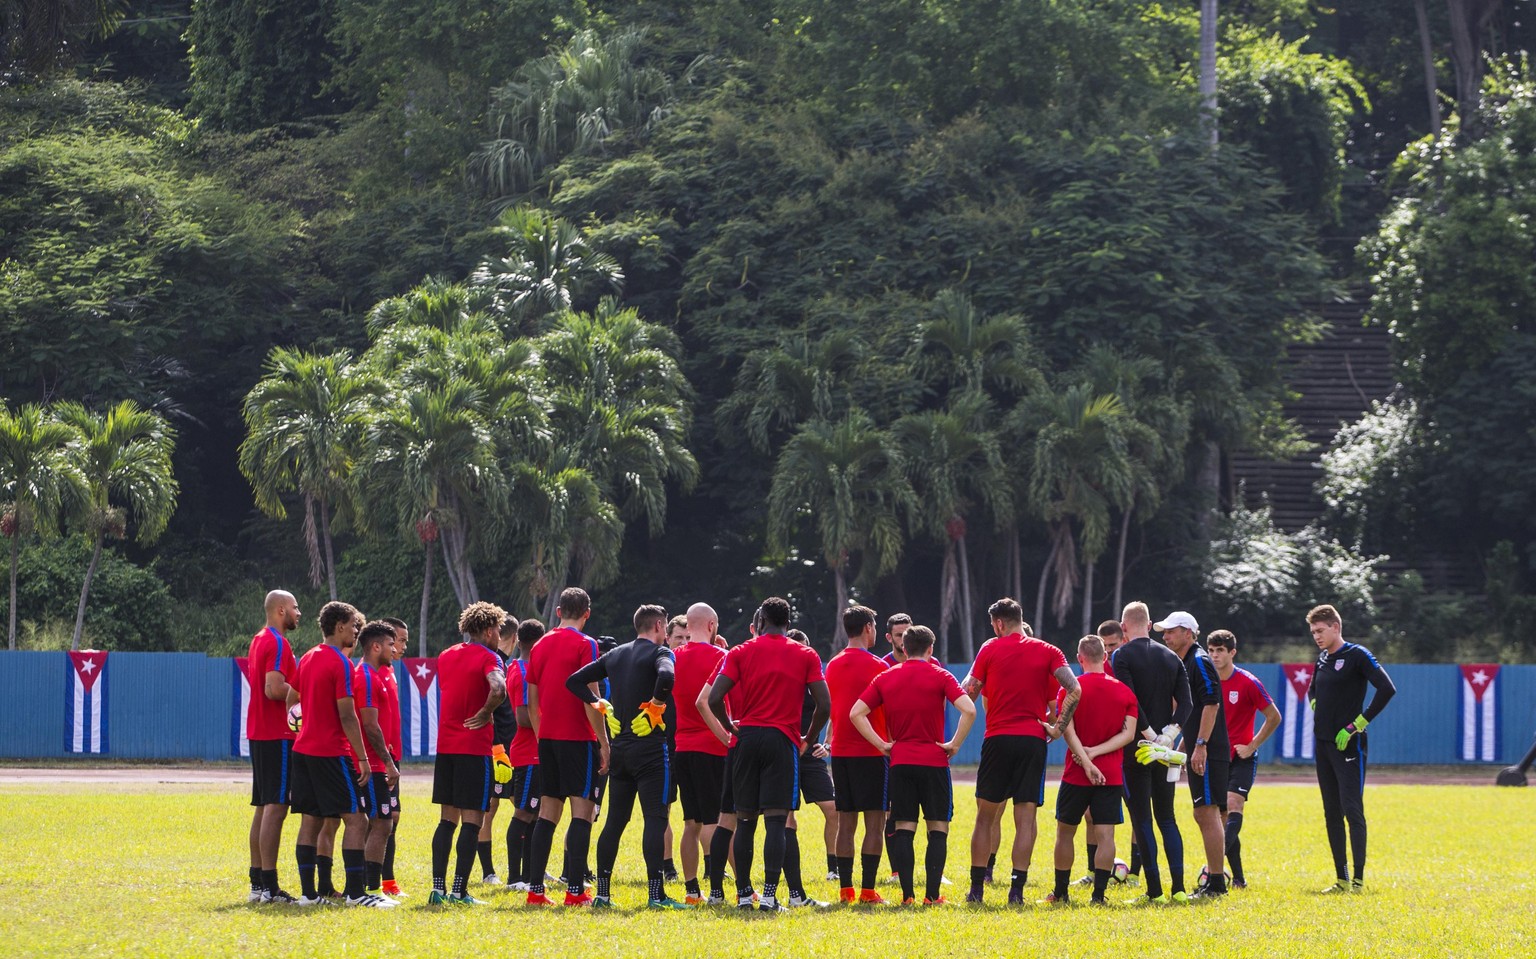 The United States national soccer team coach Jurgen Klinsmann, at right with white cap, gives instructions to his players during a training session at Pedro Marrero Stadium in Havana, Cuba, Thursday,  ...